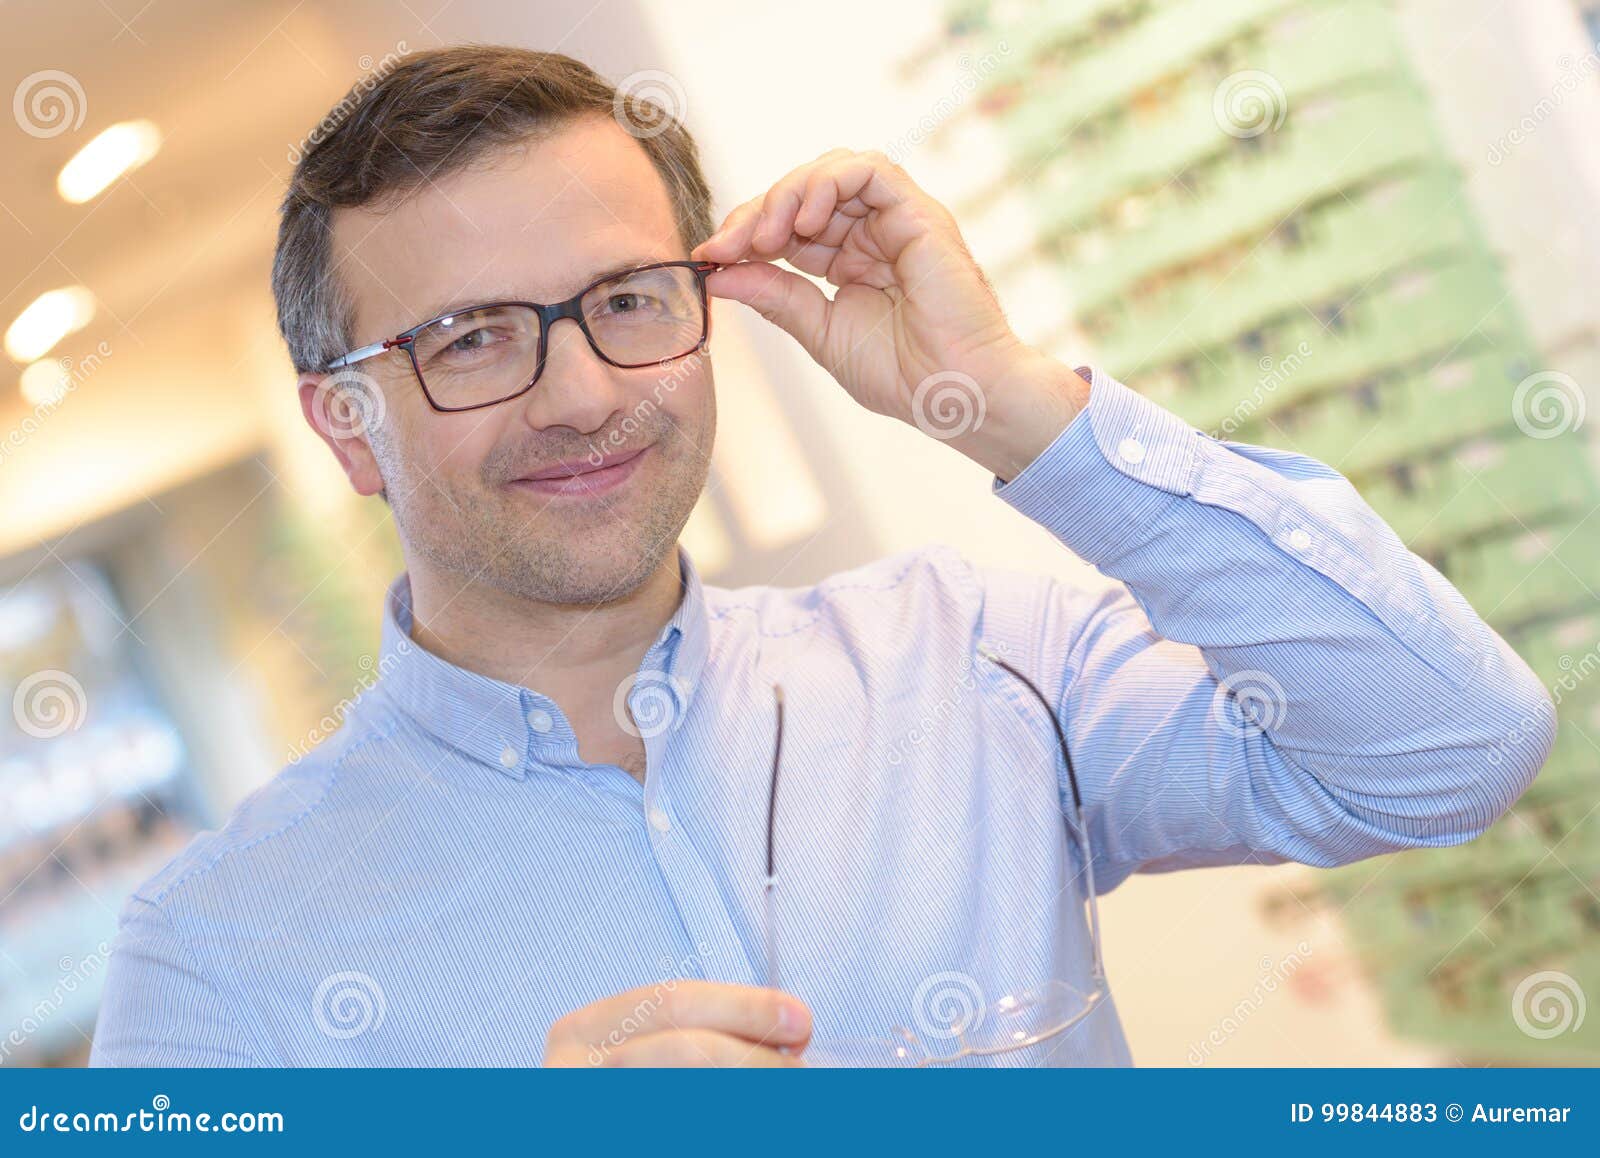 Portrait Handsome Mature Man Trying New Glasses at Optician Stock Image ...